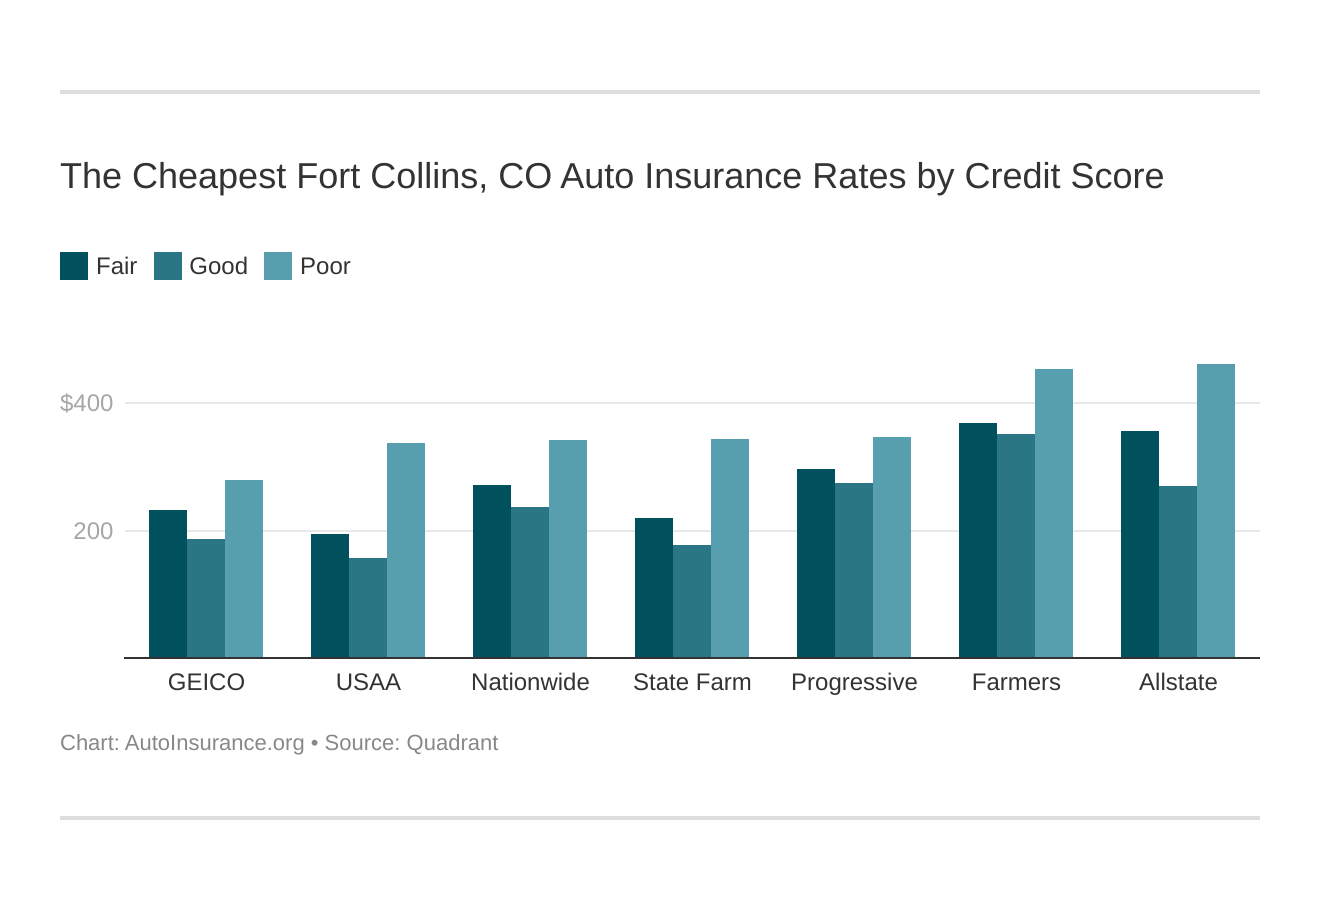 The Cheapest Fort Collins, CO Auto Insurance Rates by Credit Score